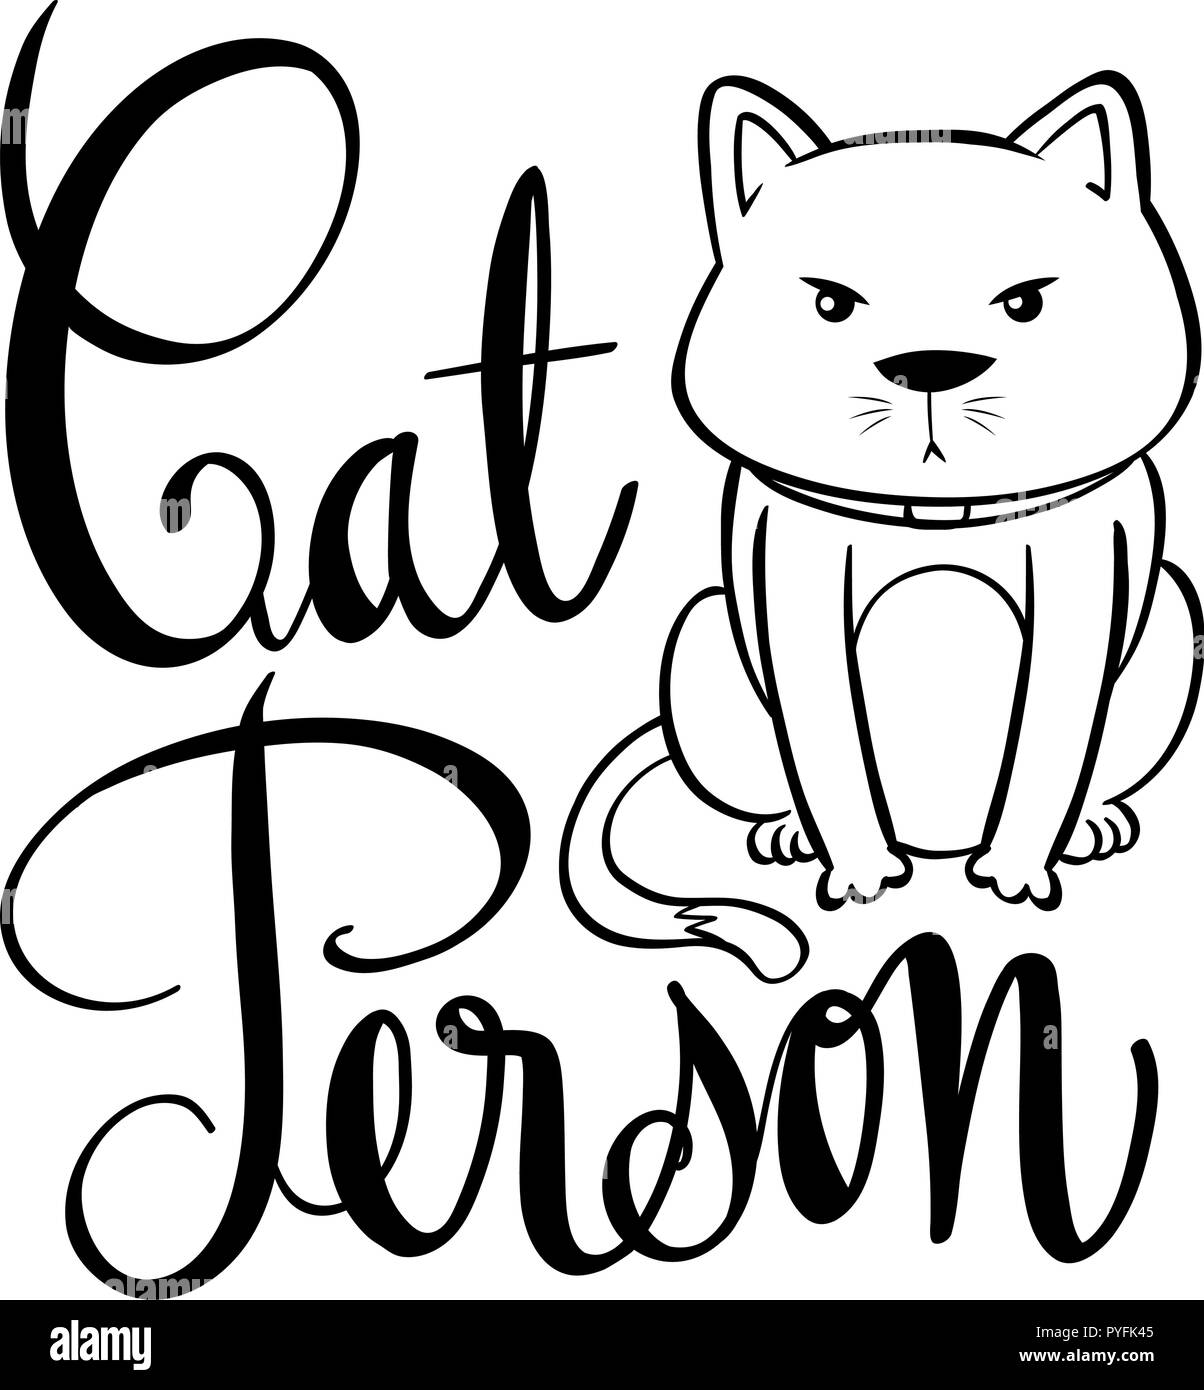 English phrase for cat person illustration Stock Vector